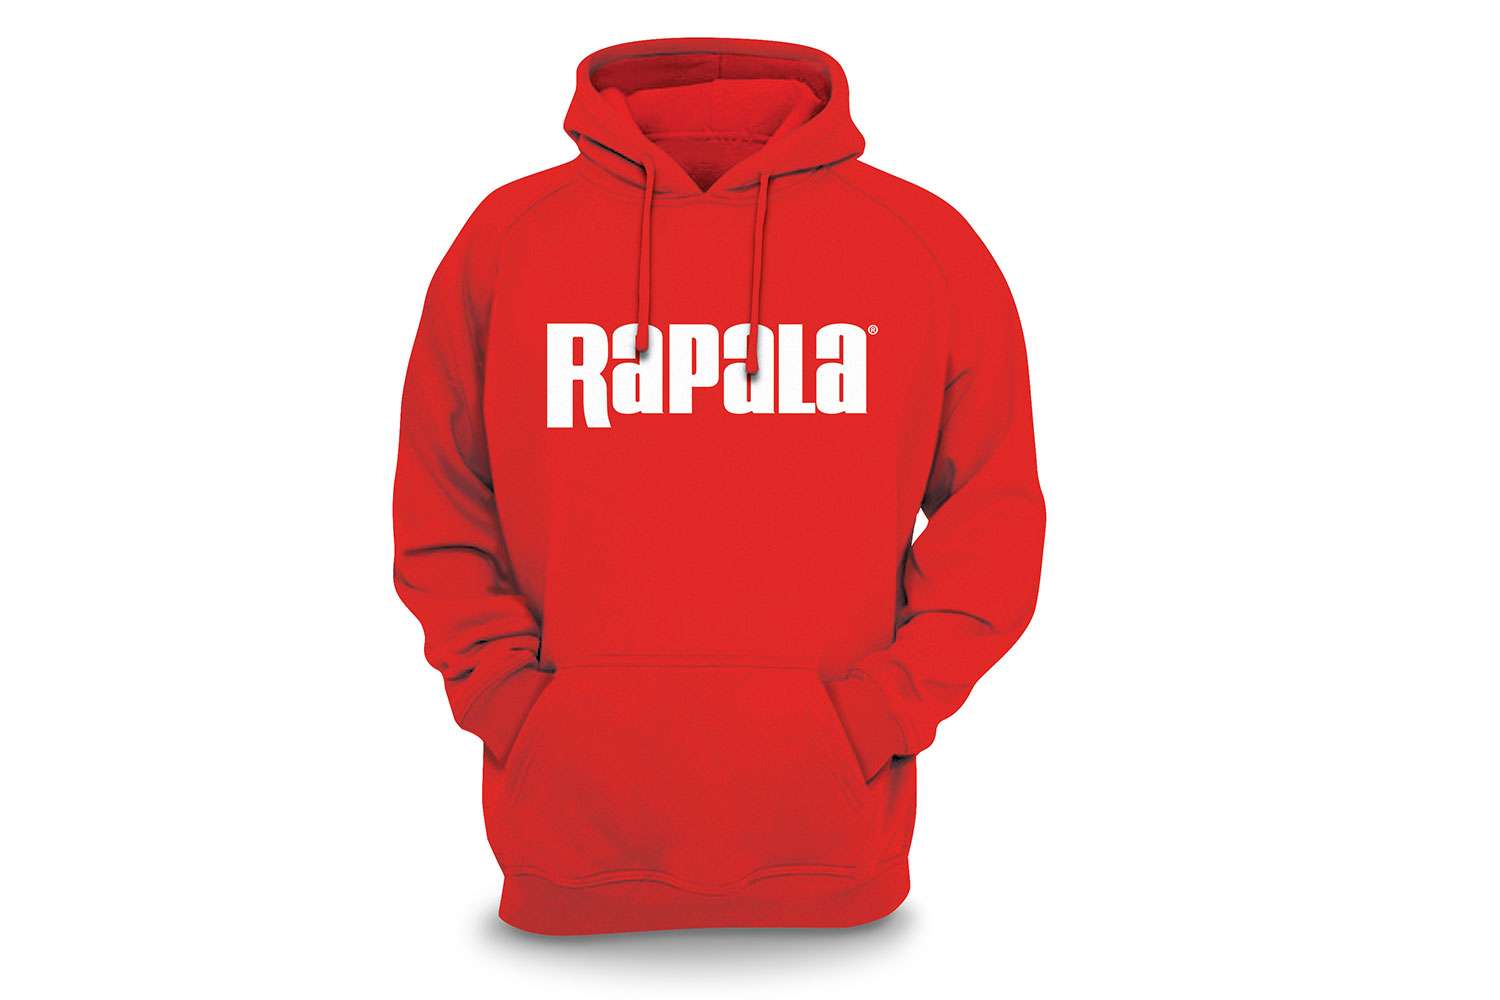 <B>Rapala Hooded Sweatshirt </B>
<BR>A must-have sweatshirt, the ultimate combination of comfort, function and warmth. Full fleece interior, kangaroo front pouch, sizes XS-XXXL and six colors/patterns. 
<BR>
<B>MSRP: $59.99</B>